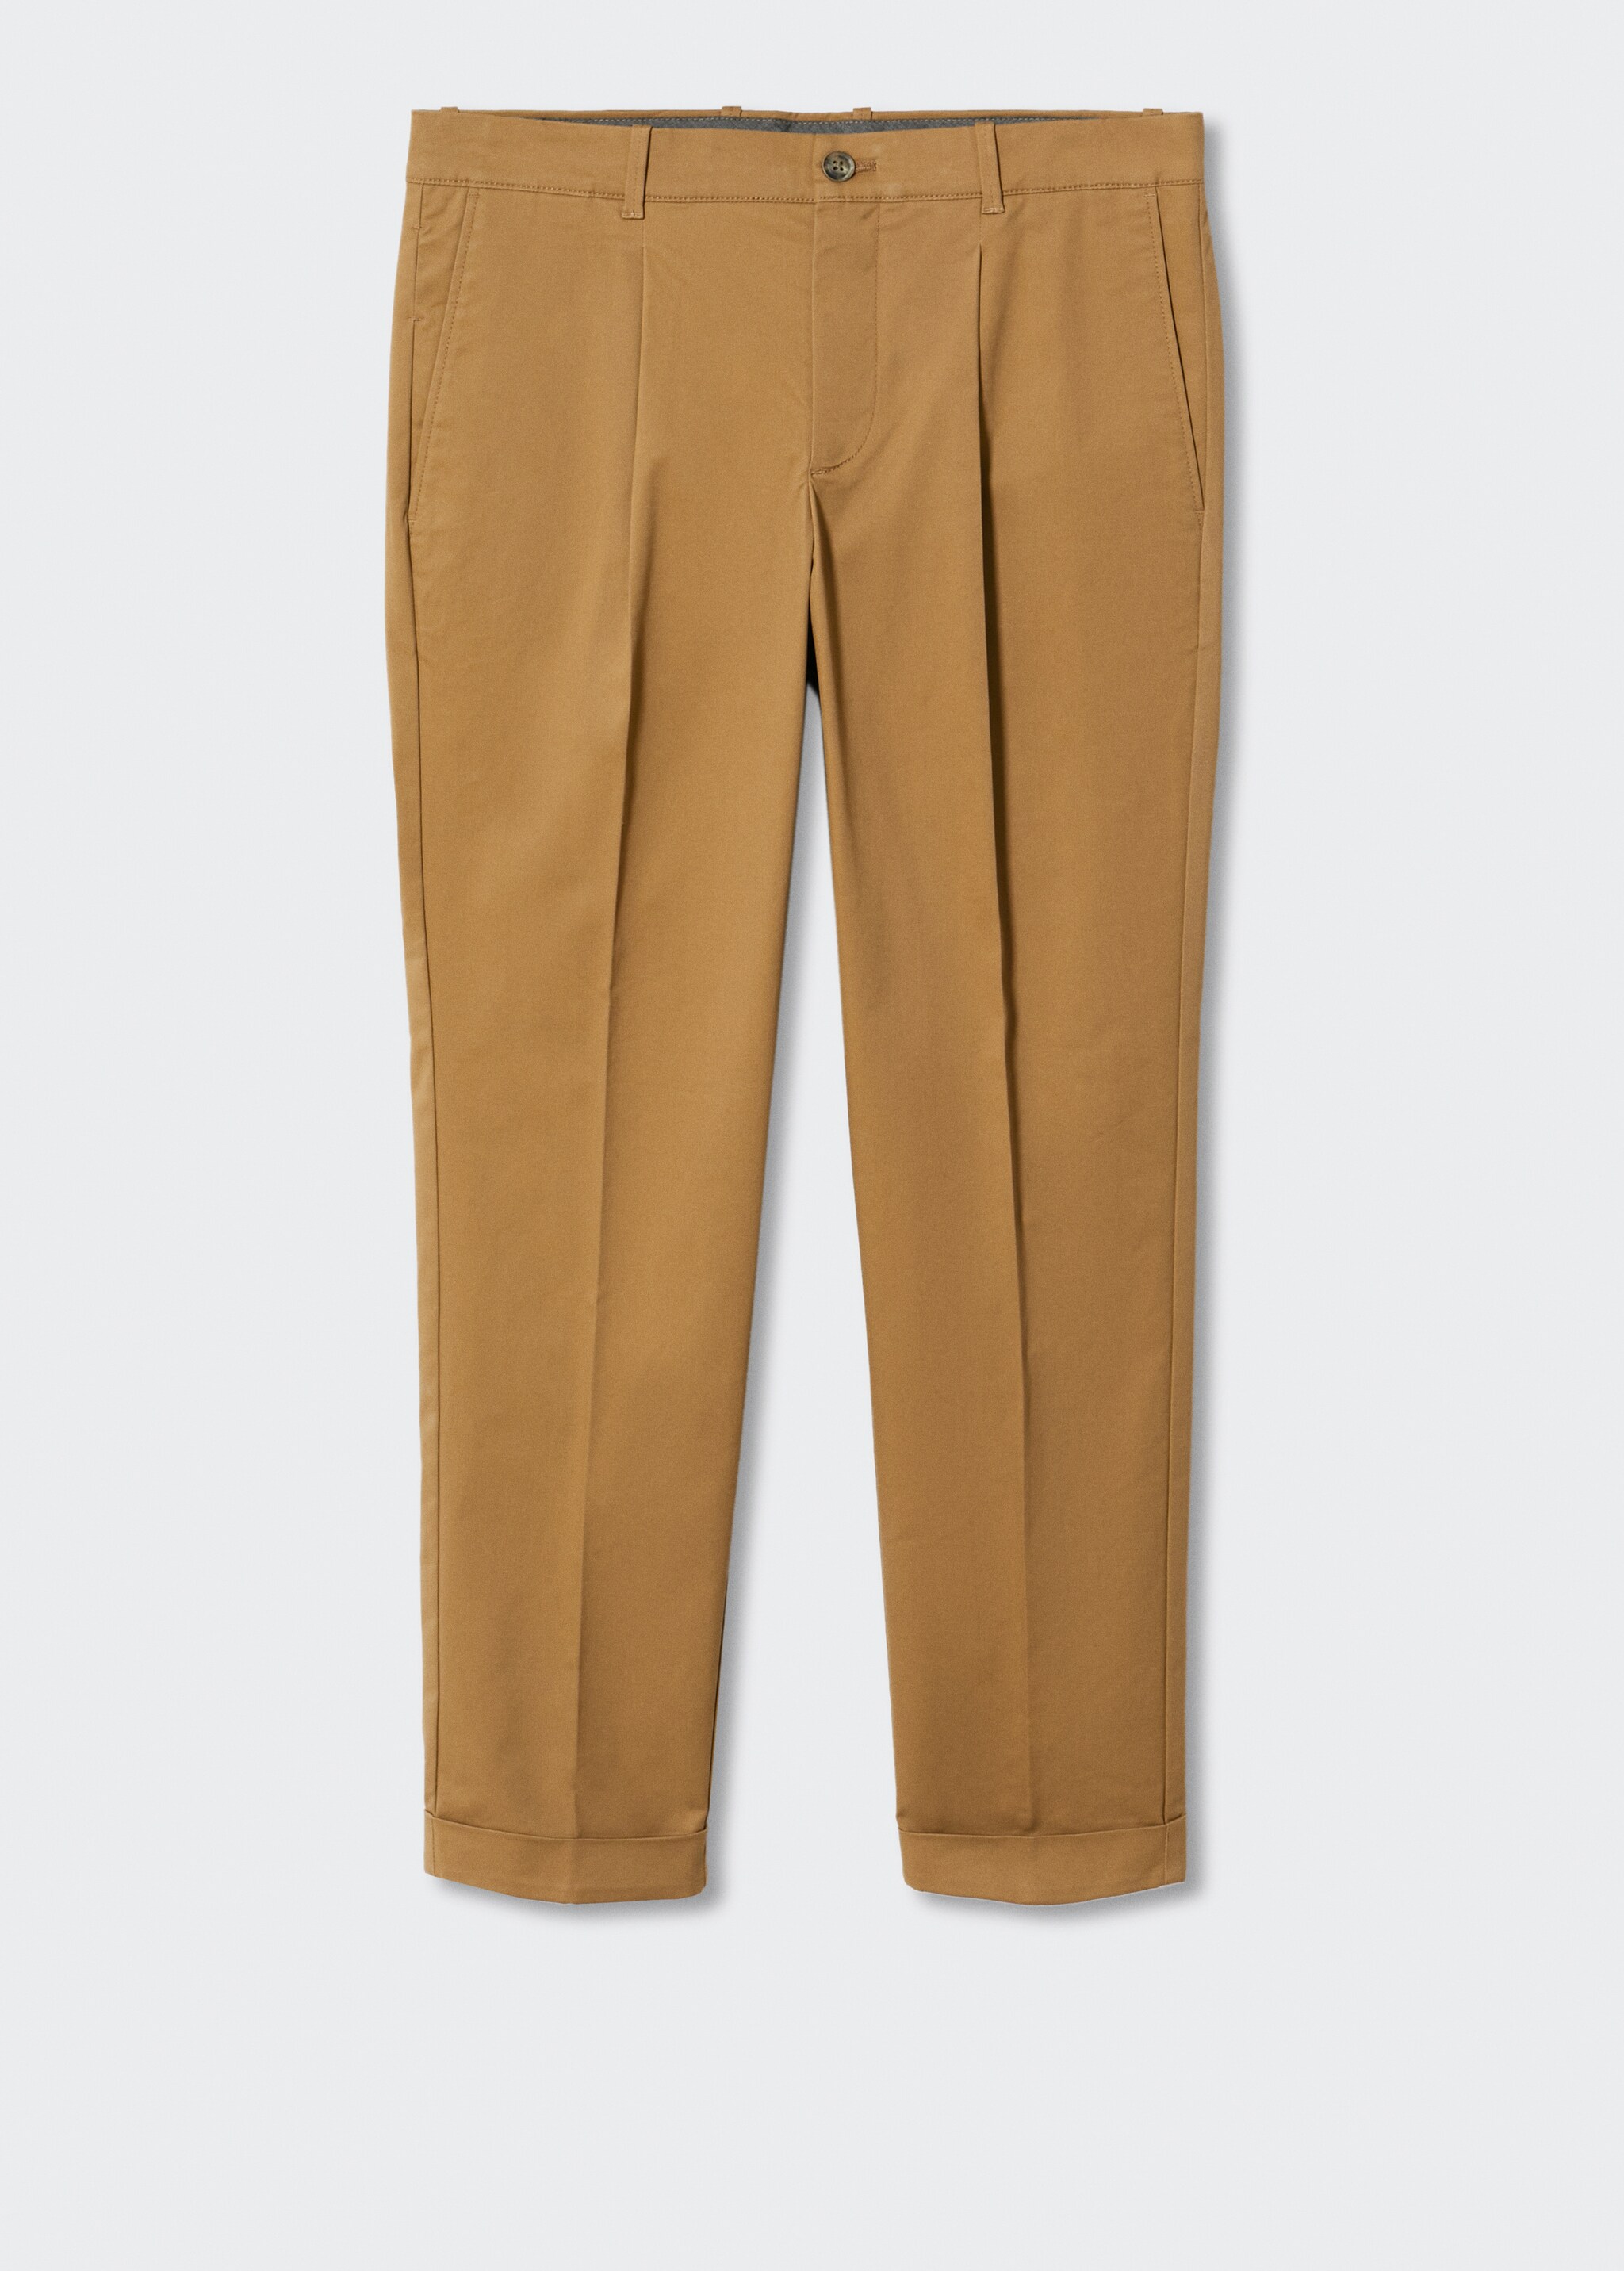 Pleated chinos - Article without model